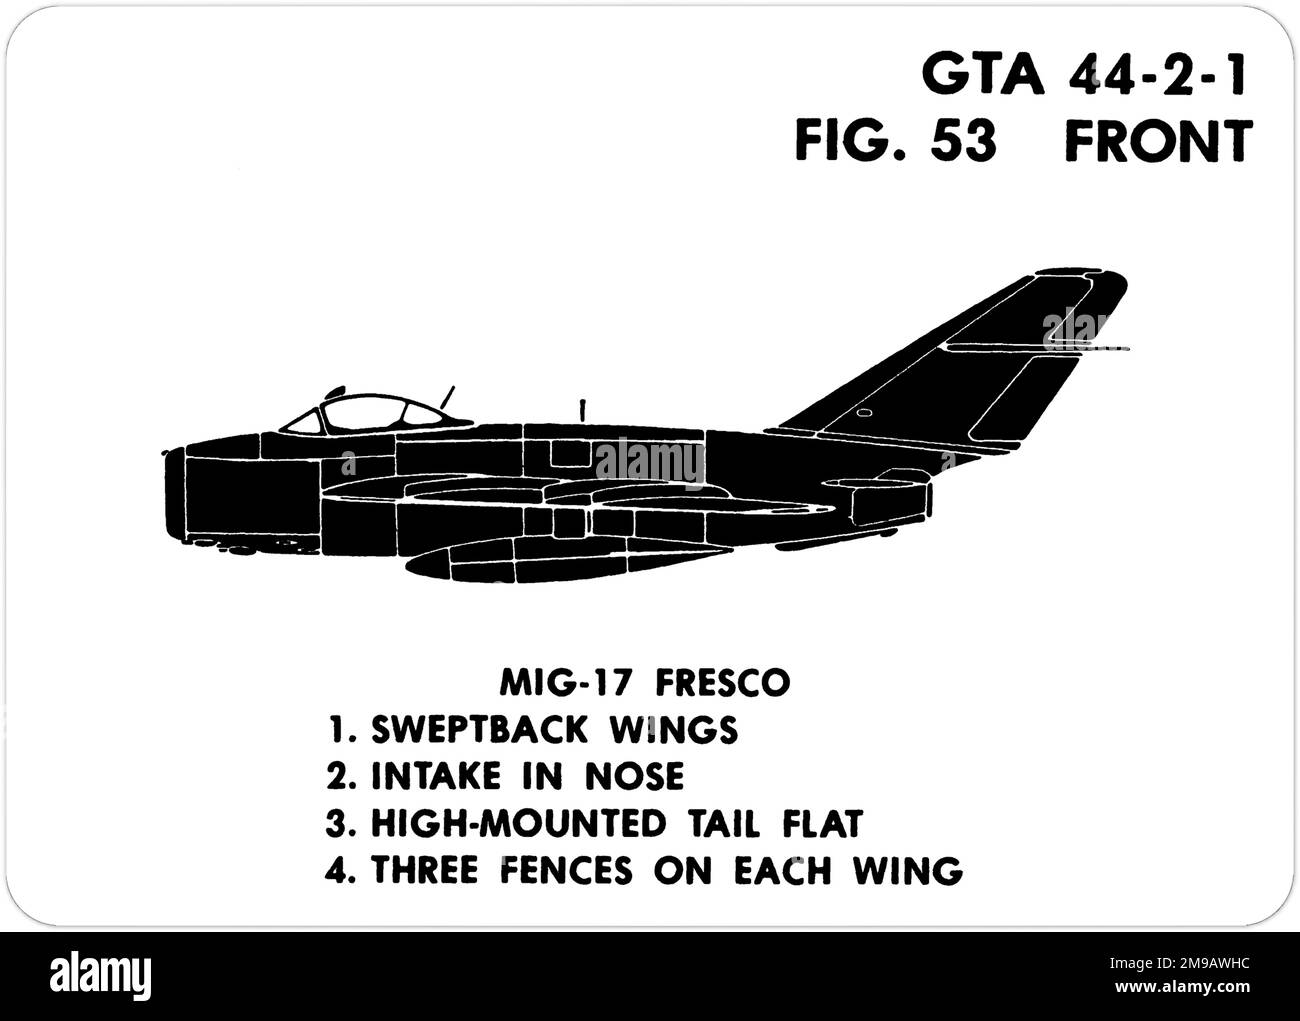 Mikoyan-Guryevich MiG-17F (NATO codename: Fresco C). This is one of the series of Graphics Training Aids (GTA) used by the United States Army to train their personnel to recognize friendly and hostile aircraft. This particular set, GTA 44-2-1, was issued in July1977. The set features aircraft from: Canada, Italy, United Kingdom, United States, and the USSR. Stock Photo